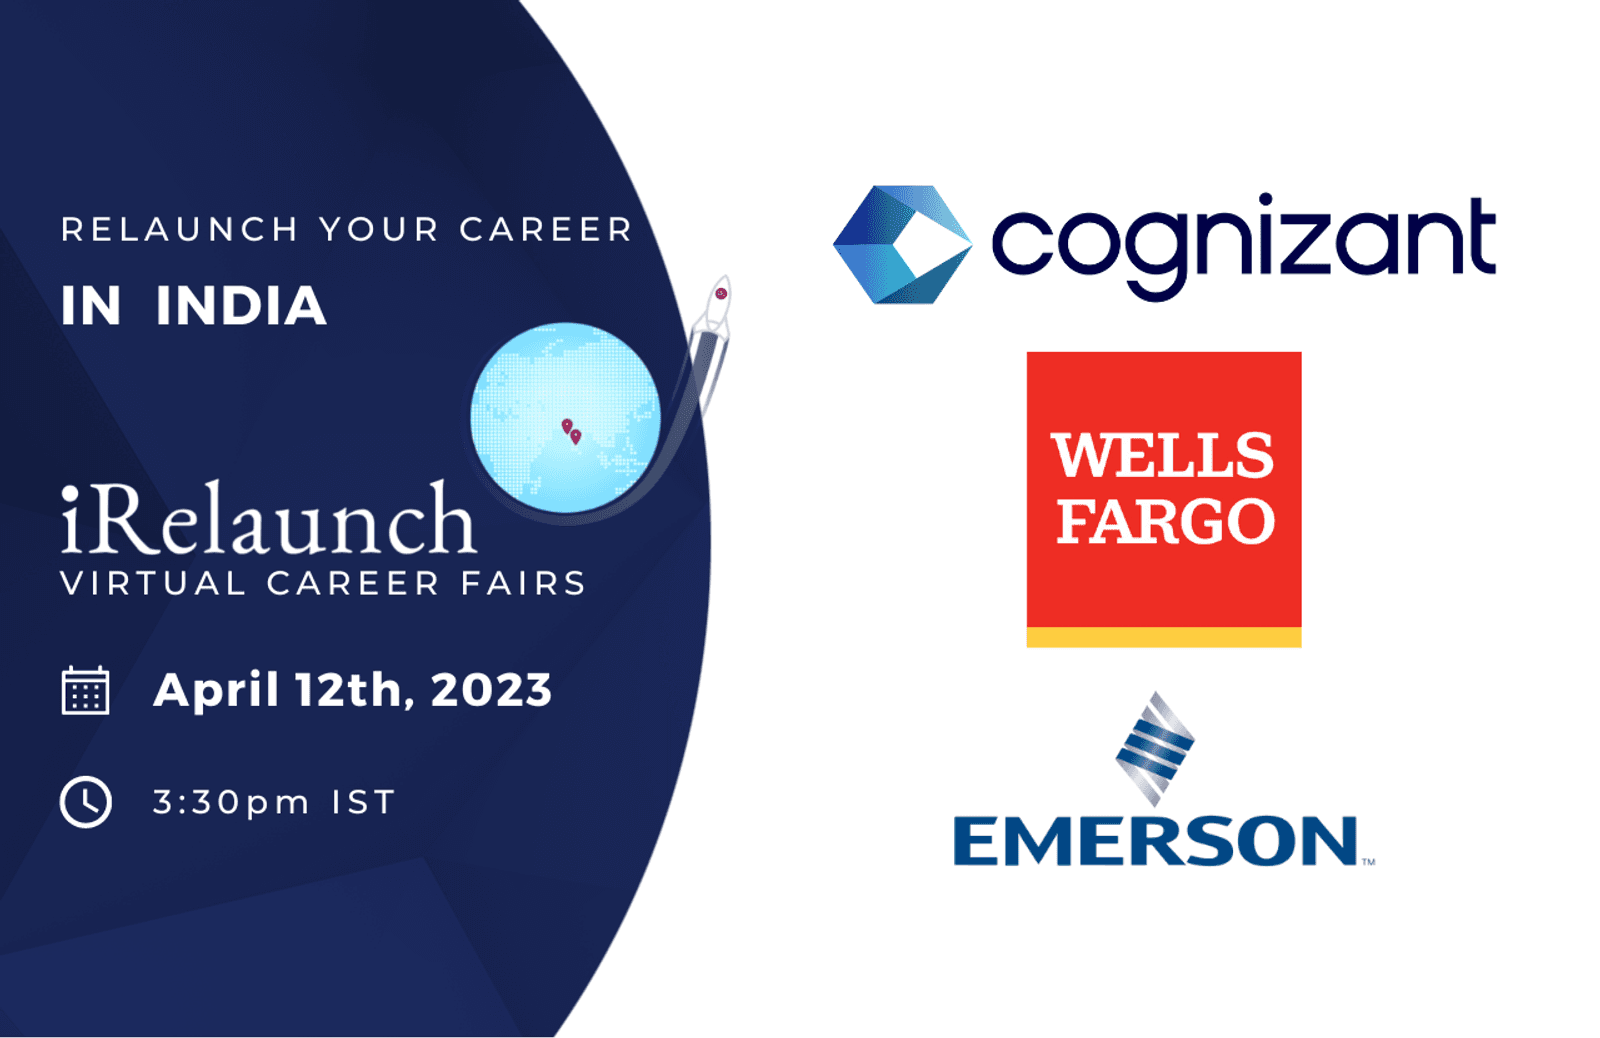 The iRelaunch Virtual Career Fairs: Relaunch your Career in India